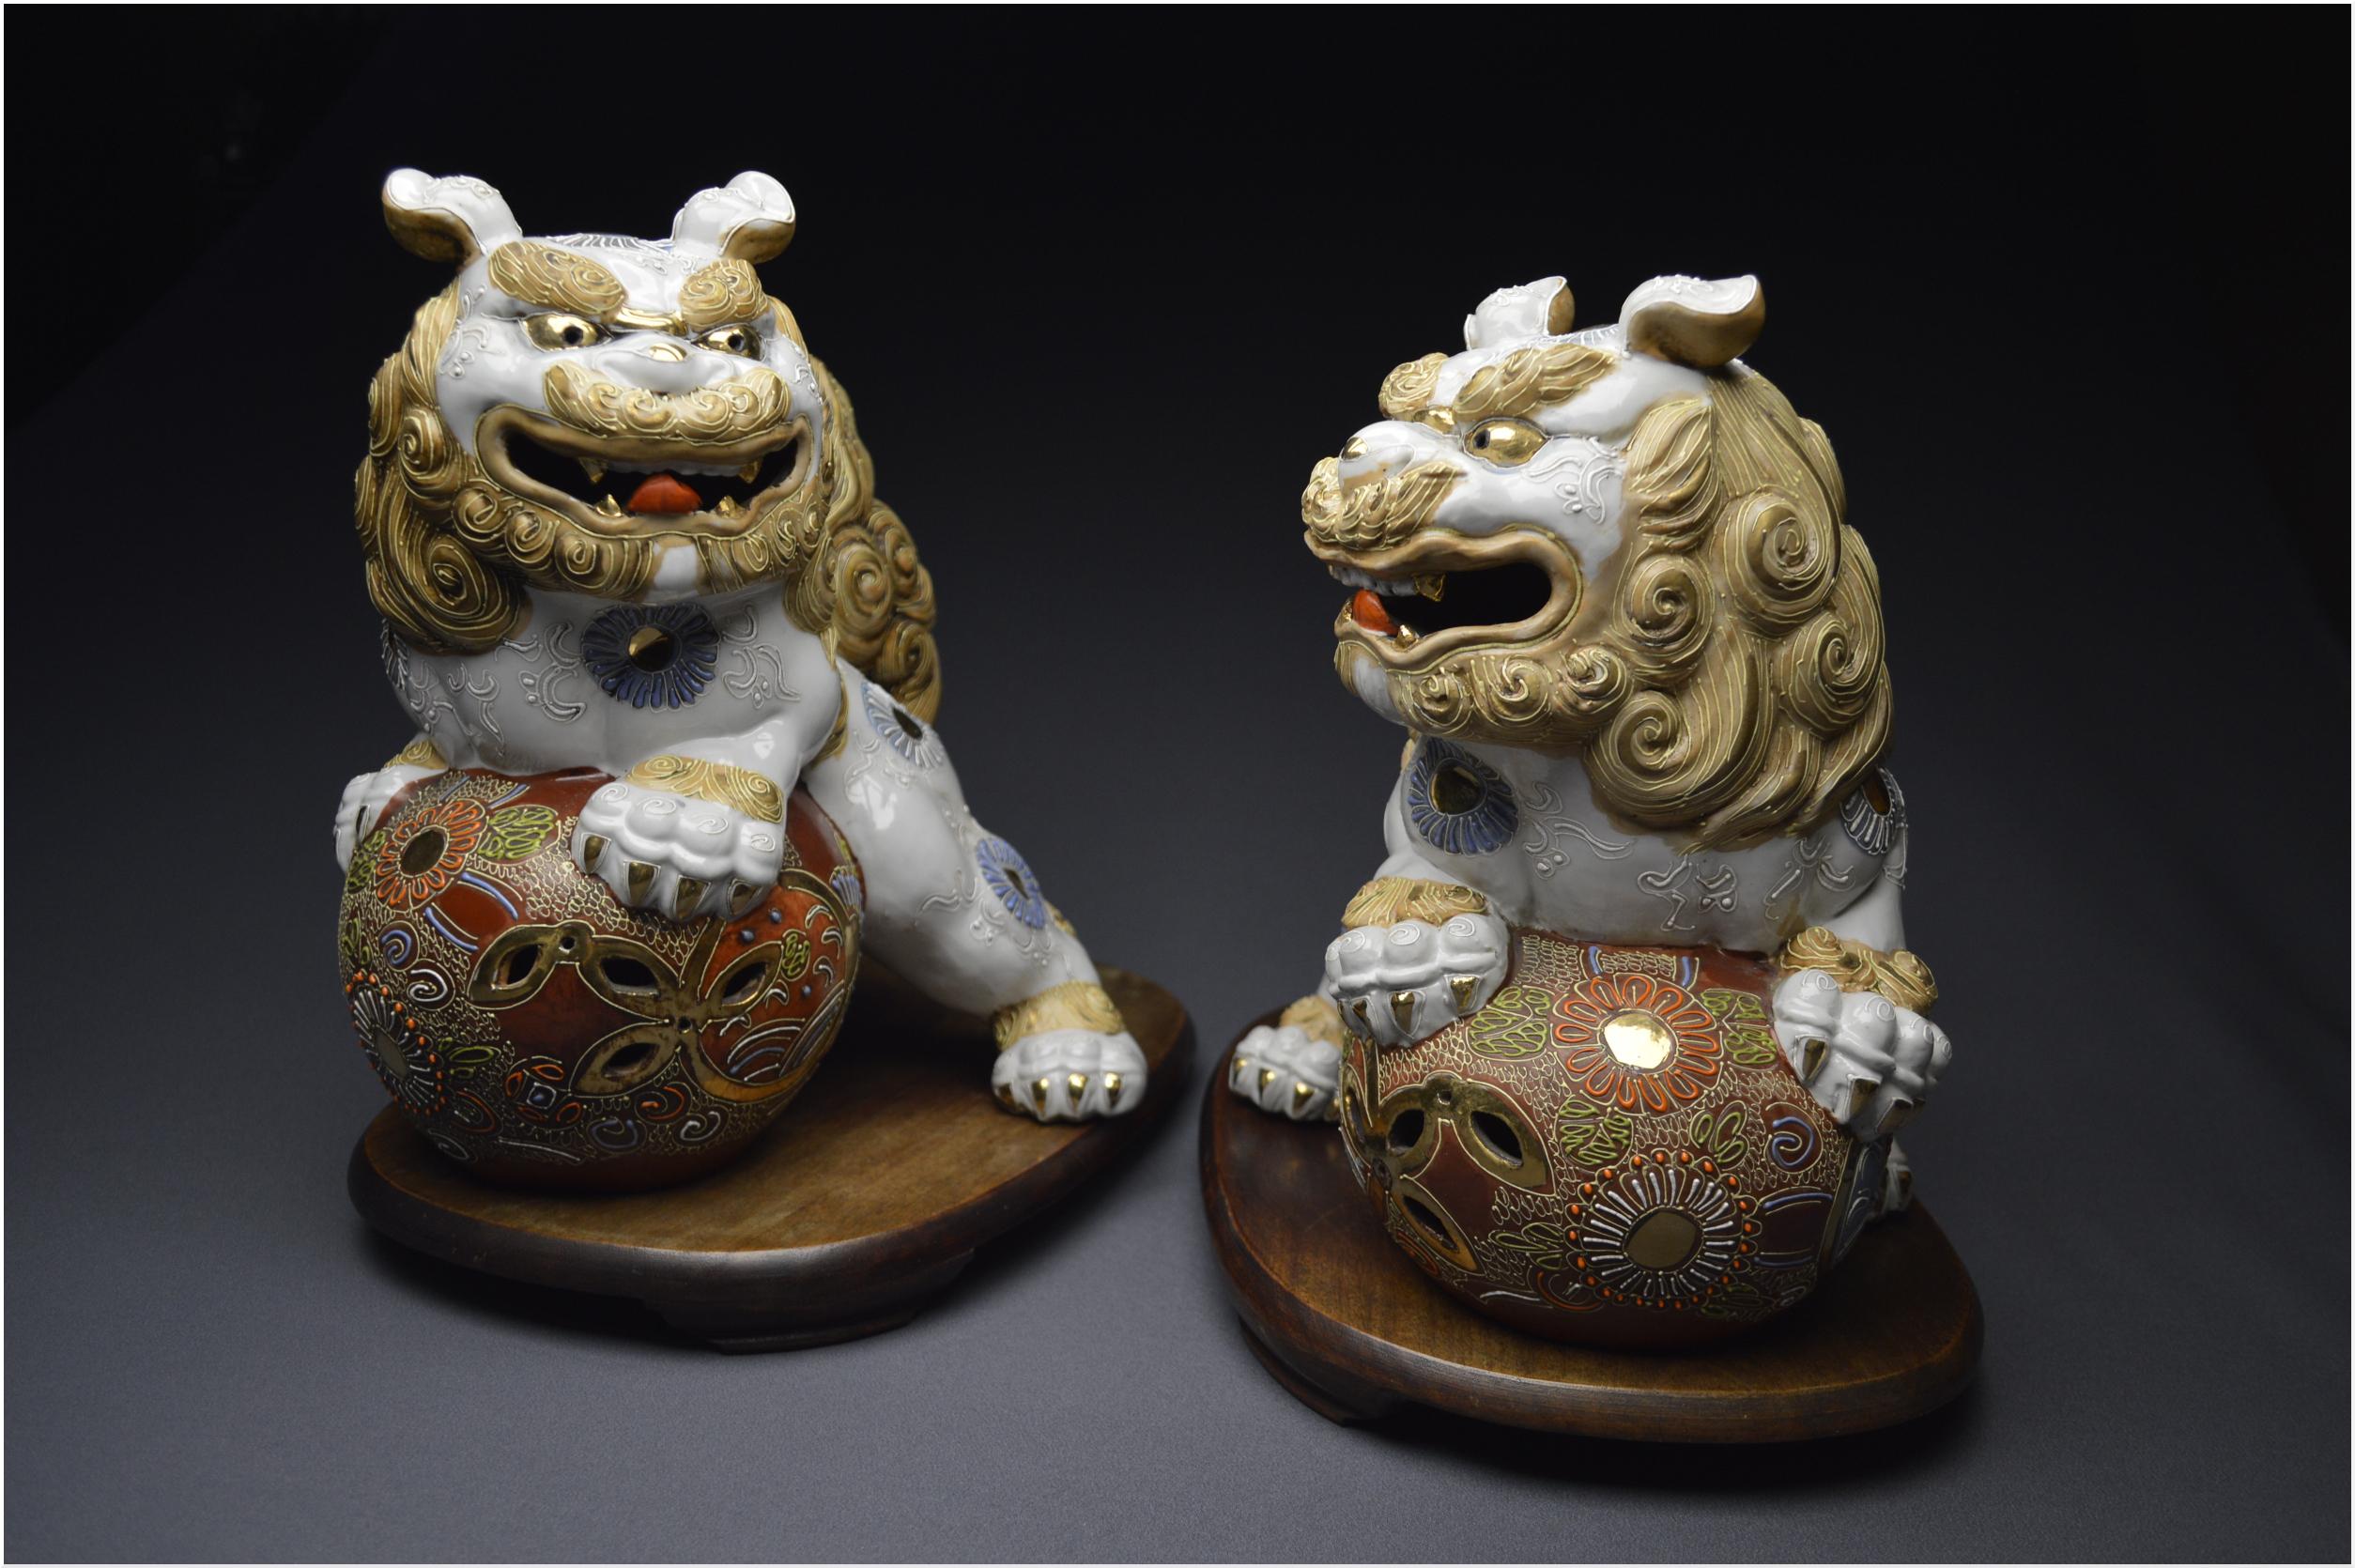 Pair of Japanese Buddhist, Meiji Period Foo-Dogs from the Satsuma Kilns, 19th C. - Mixed Media Art by Unknown